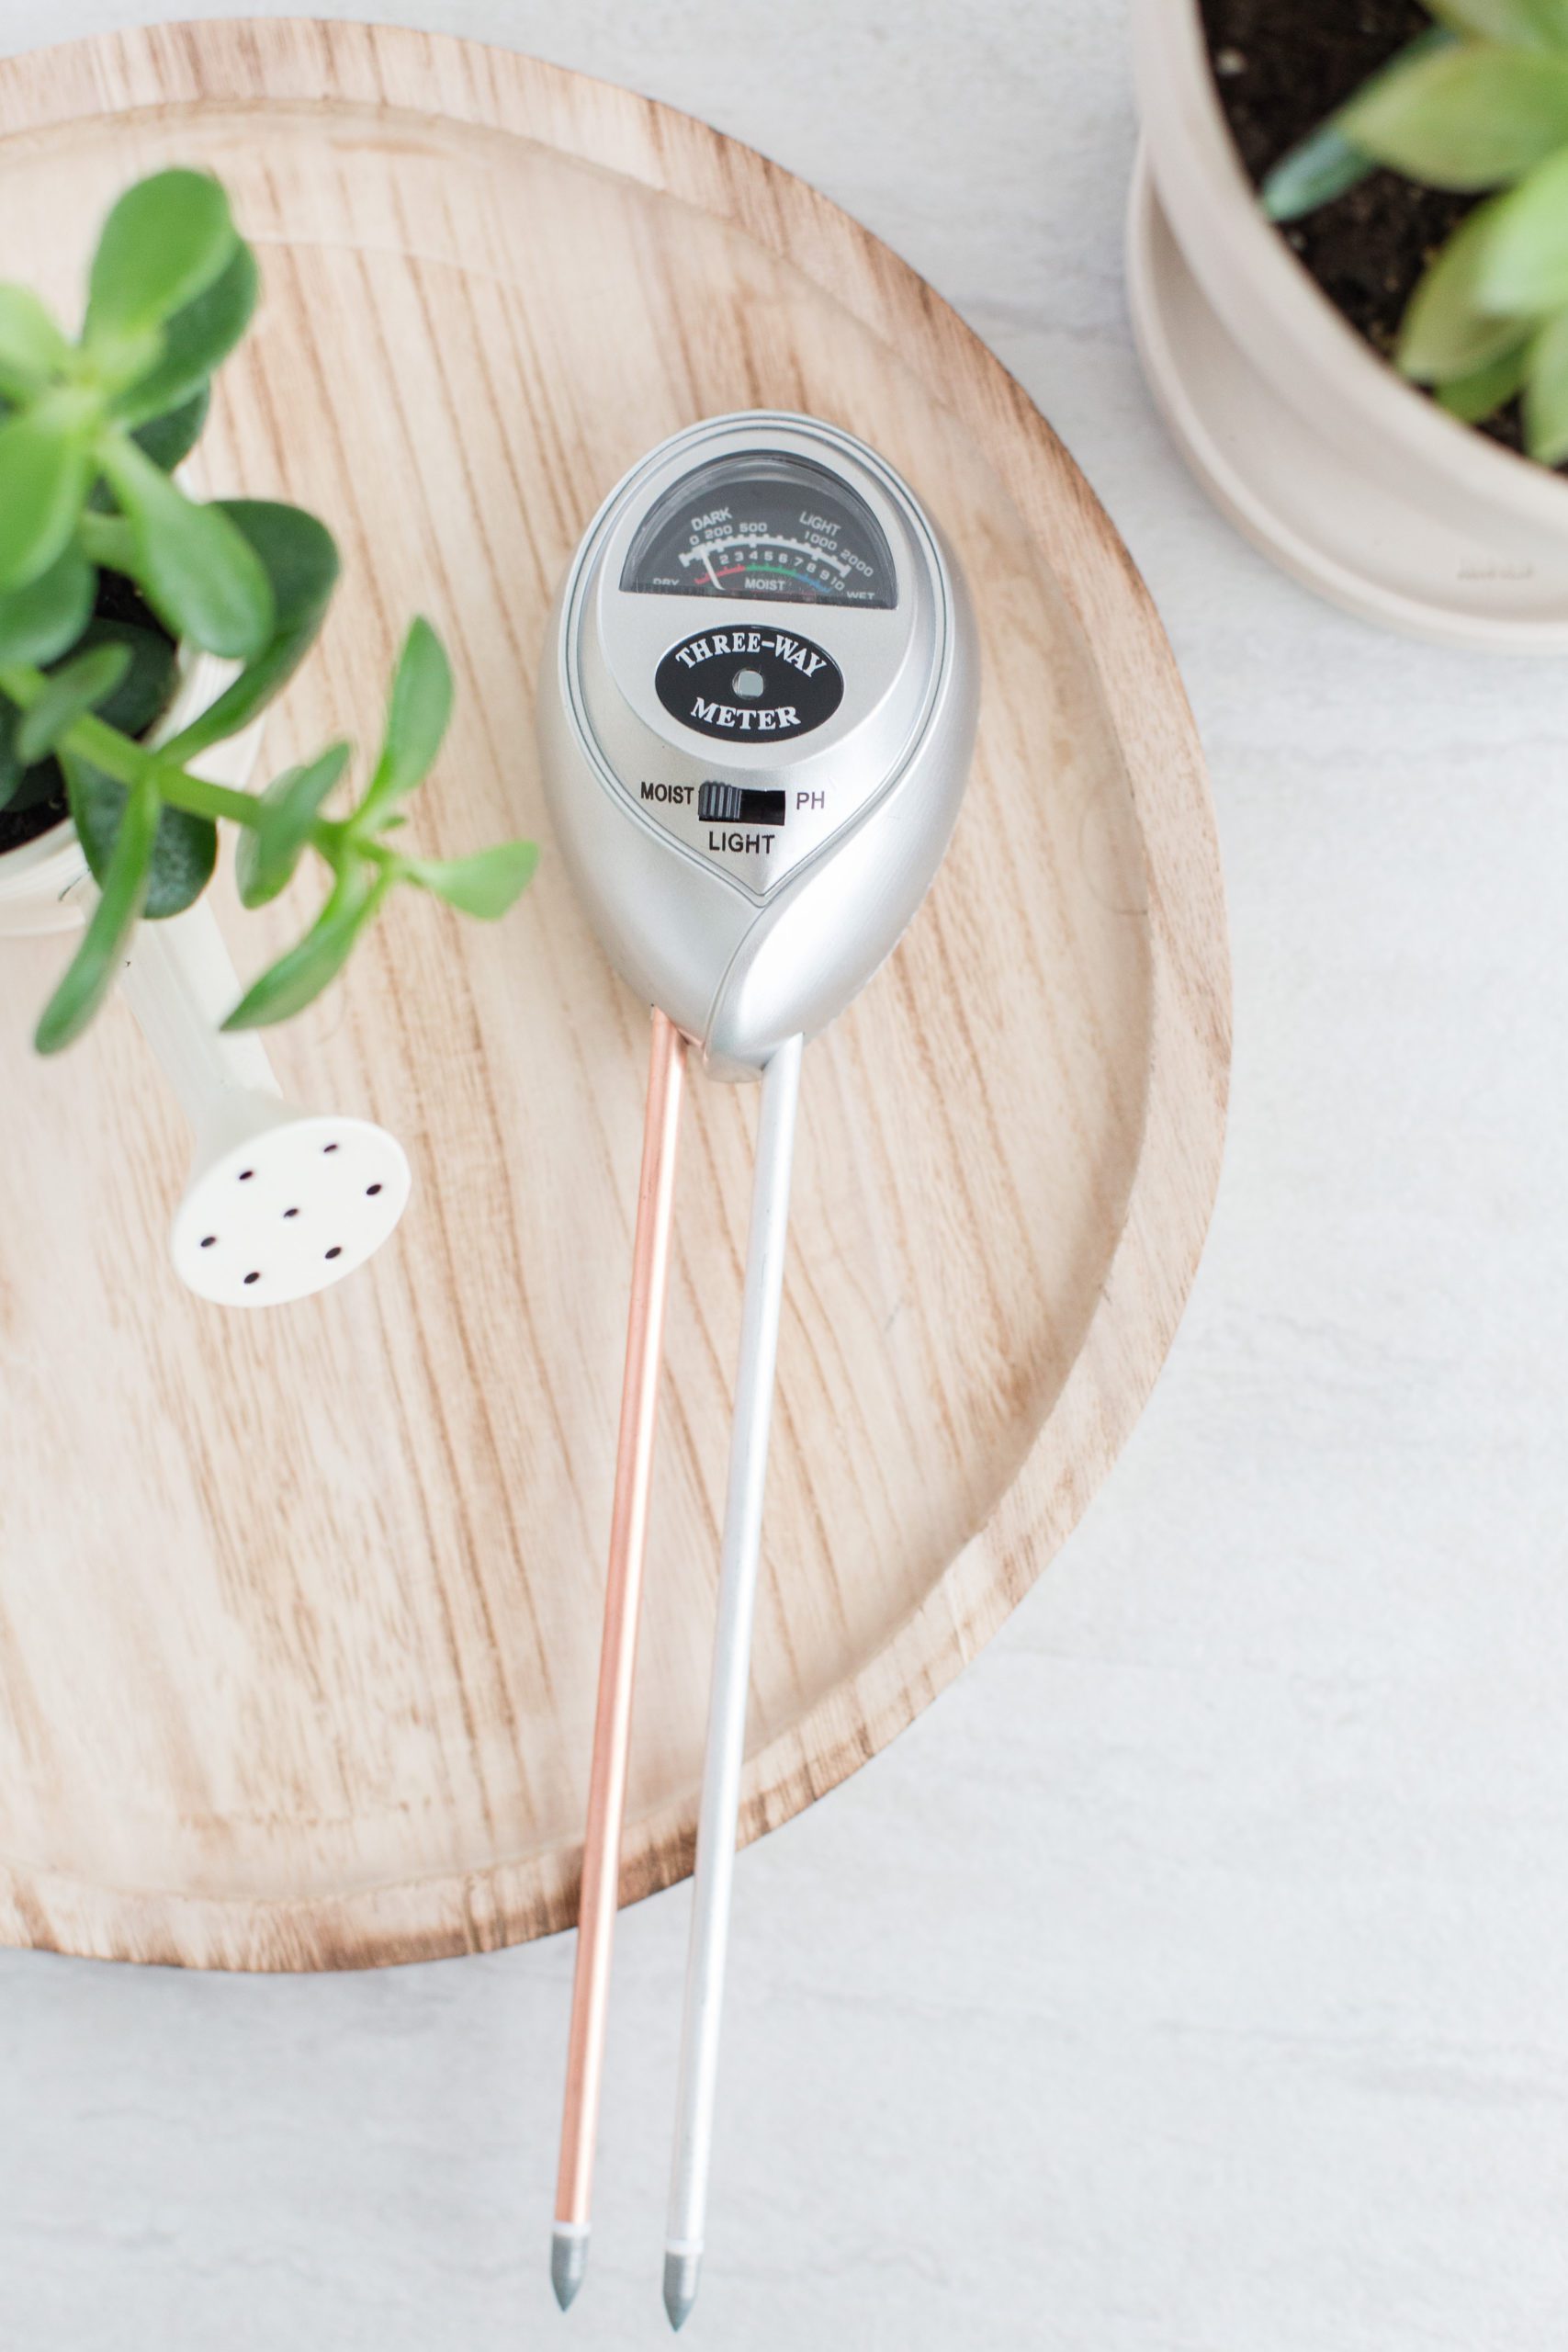 The Best Monstera Moisture Meter: How to Use a Moisture Meter to